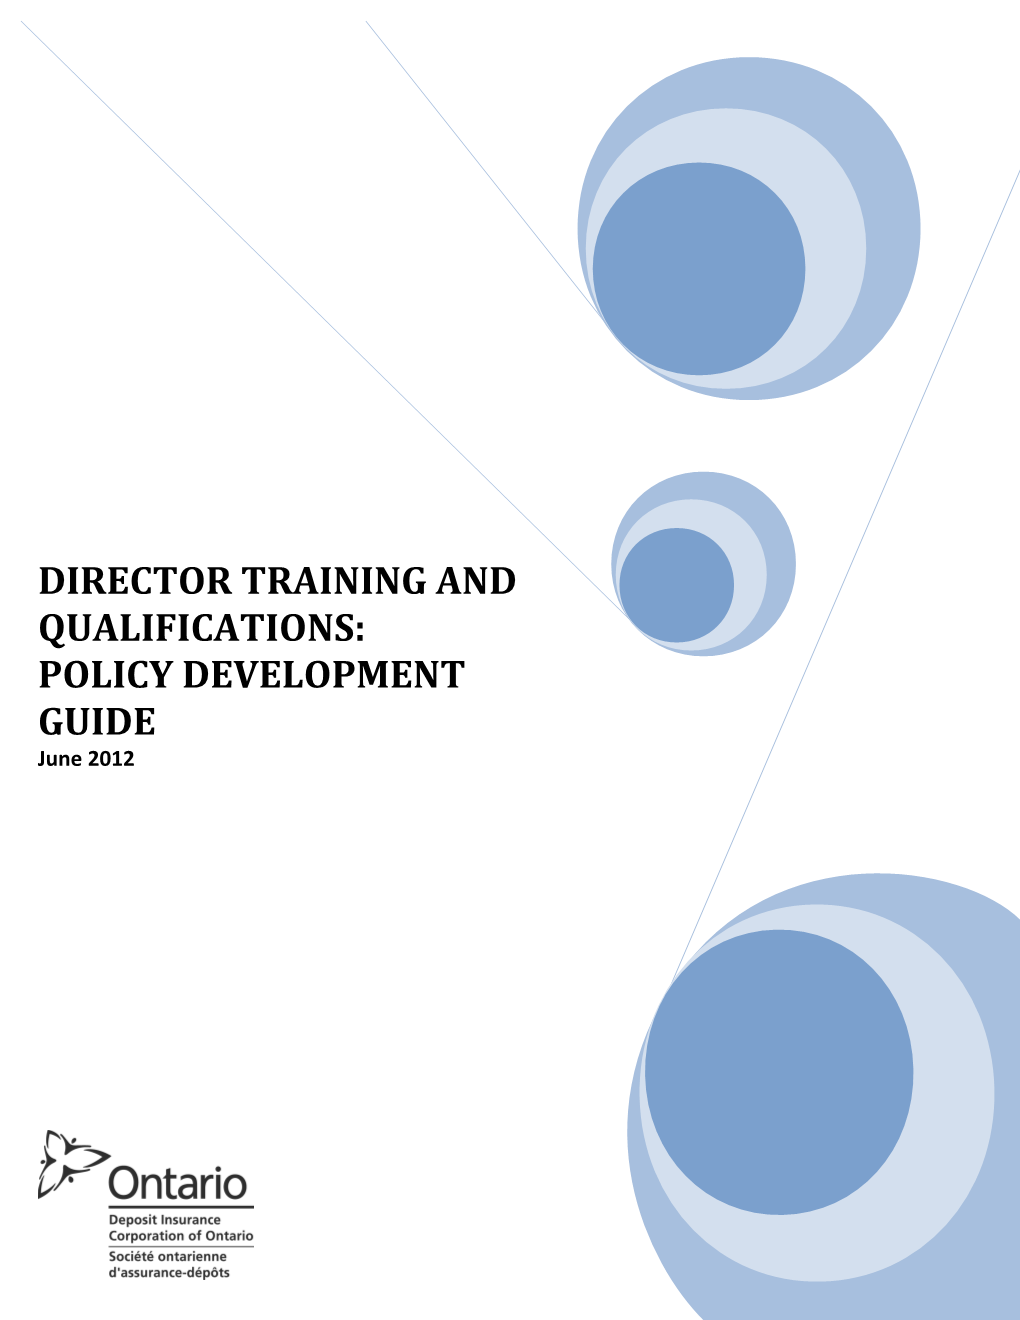 Policy Outline: Director Training & Qualifications